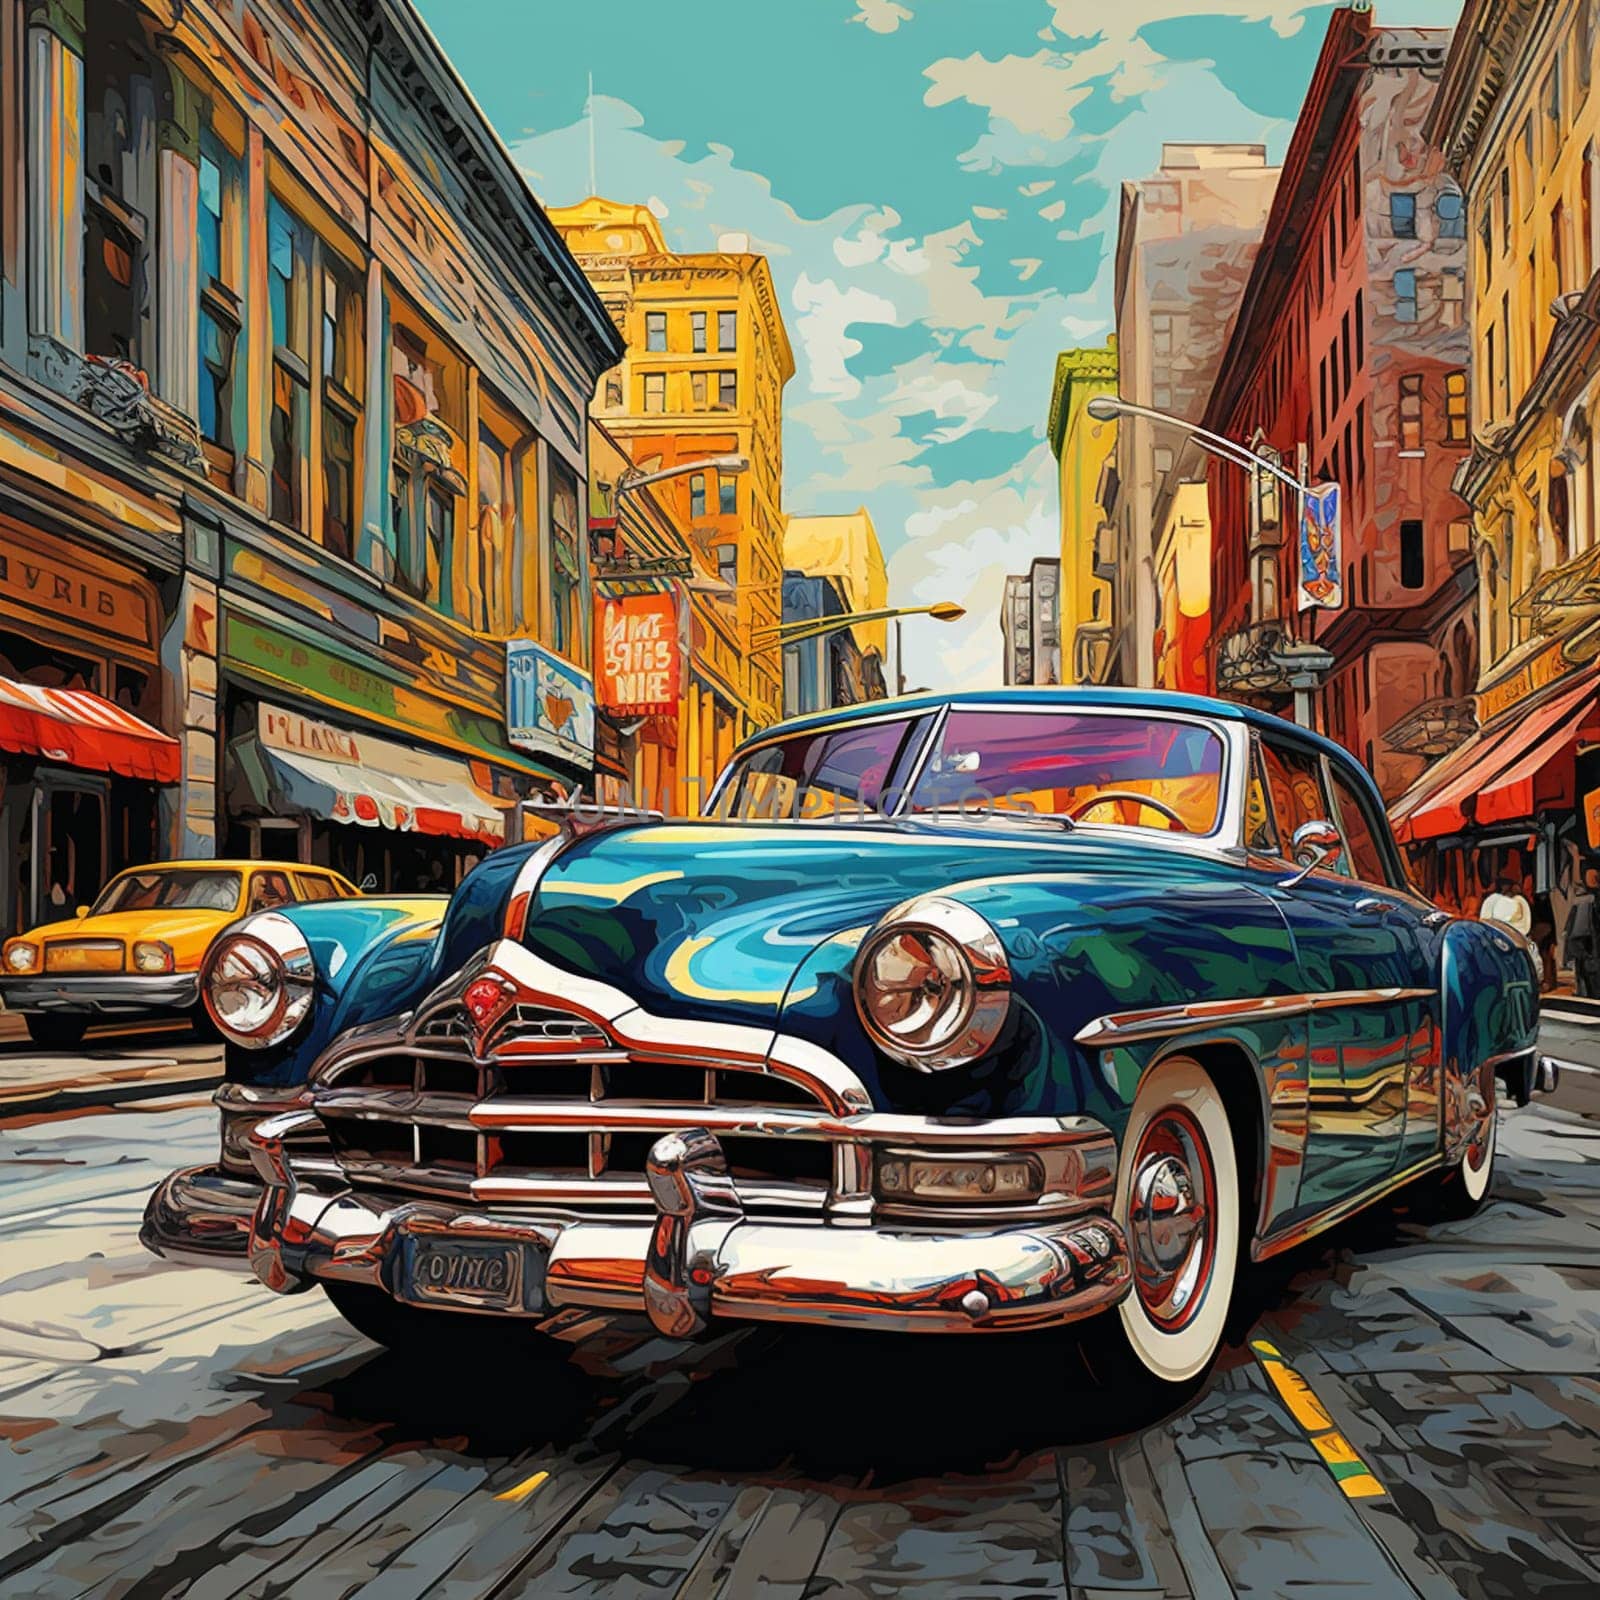 Experience the thrill of automotive history with this stunning image inspired by the title, 'Revolutionary Wheels: The Vintage Car Revolution.' Immerse yourself in a vibrant, bustling city street, where a majestic vintage car is parked, capturing the nostalgic spirit of an era defined by extraordinary automotive innovation. The art style blends realism and a touch of artistic flair, highlighting the intricate details of the car's design, while the vibrant colors and dynamic surroundings emphasize the energy of the scene. Get ready to feel the excitement, admiration, and a longing for the iconic vehicles that shaped the automotive industry.